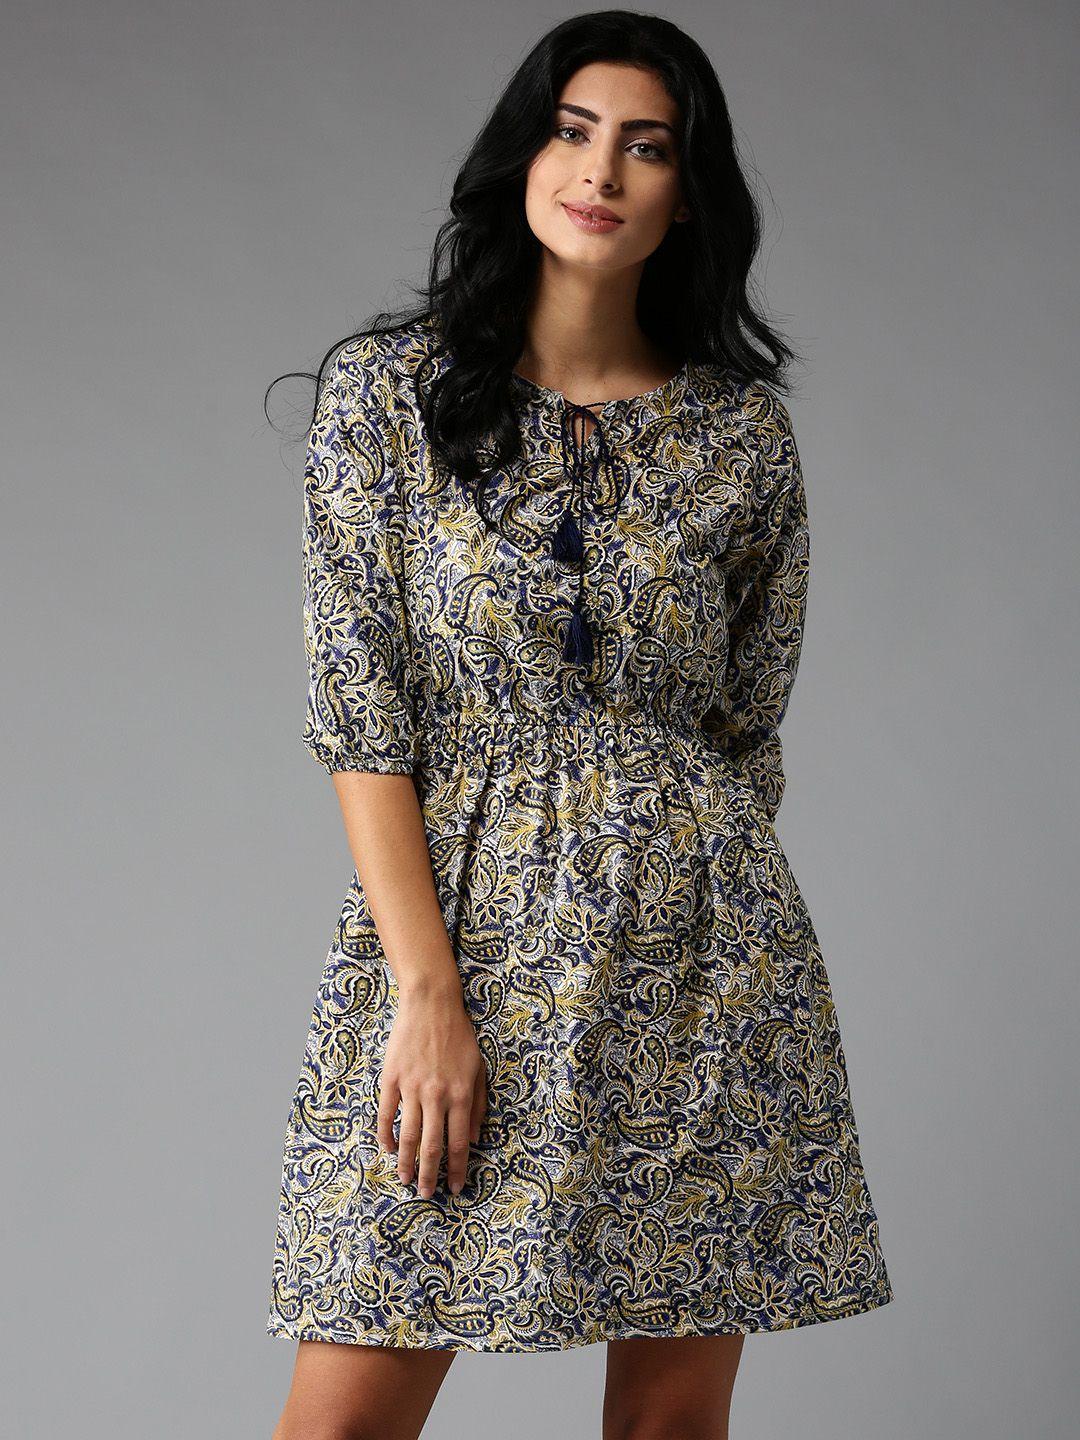 here&now women navy & yellow printed fit & flare dress